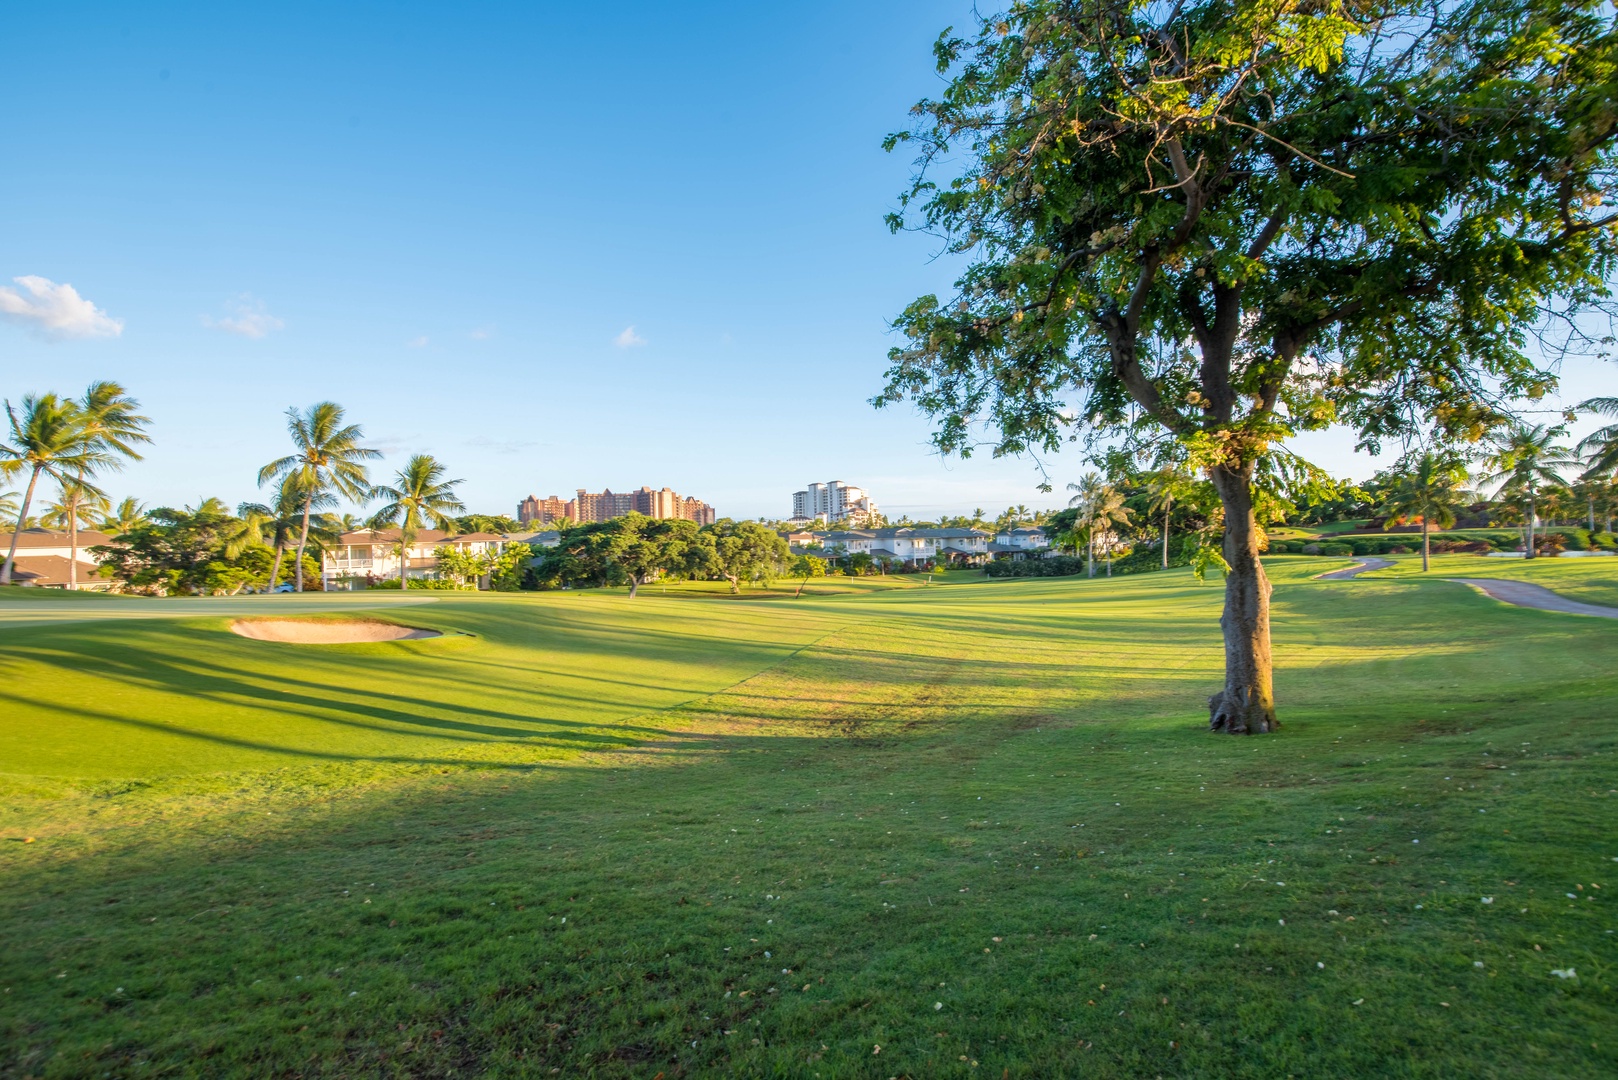 Kapolei Vacation Rentals, Fairways at Ko Olina 27H - The expansive green of the golf course.